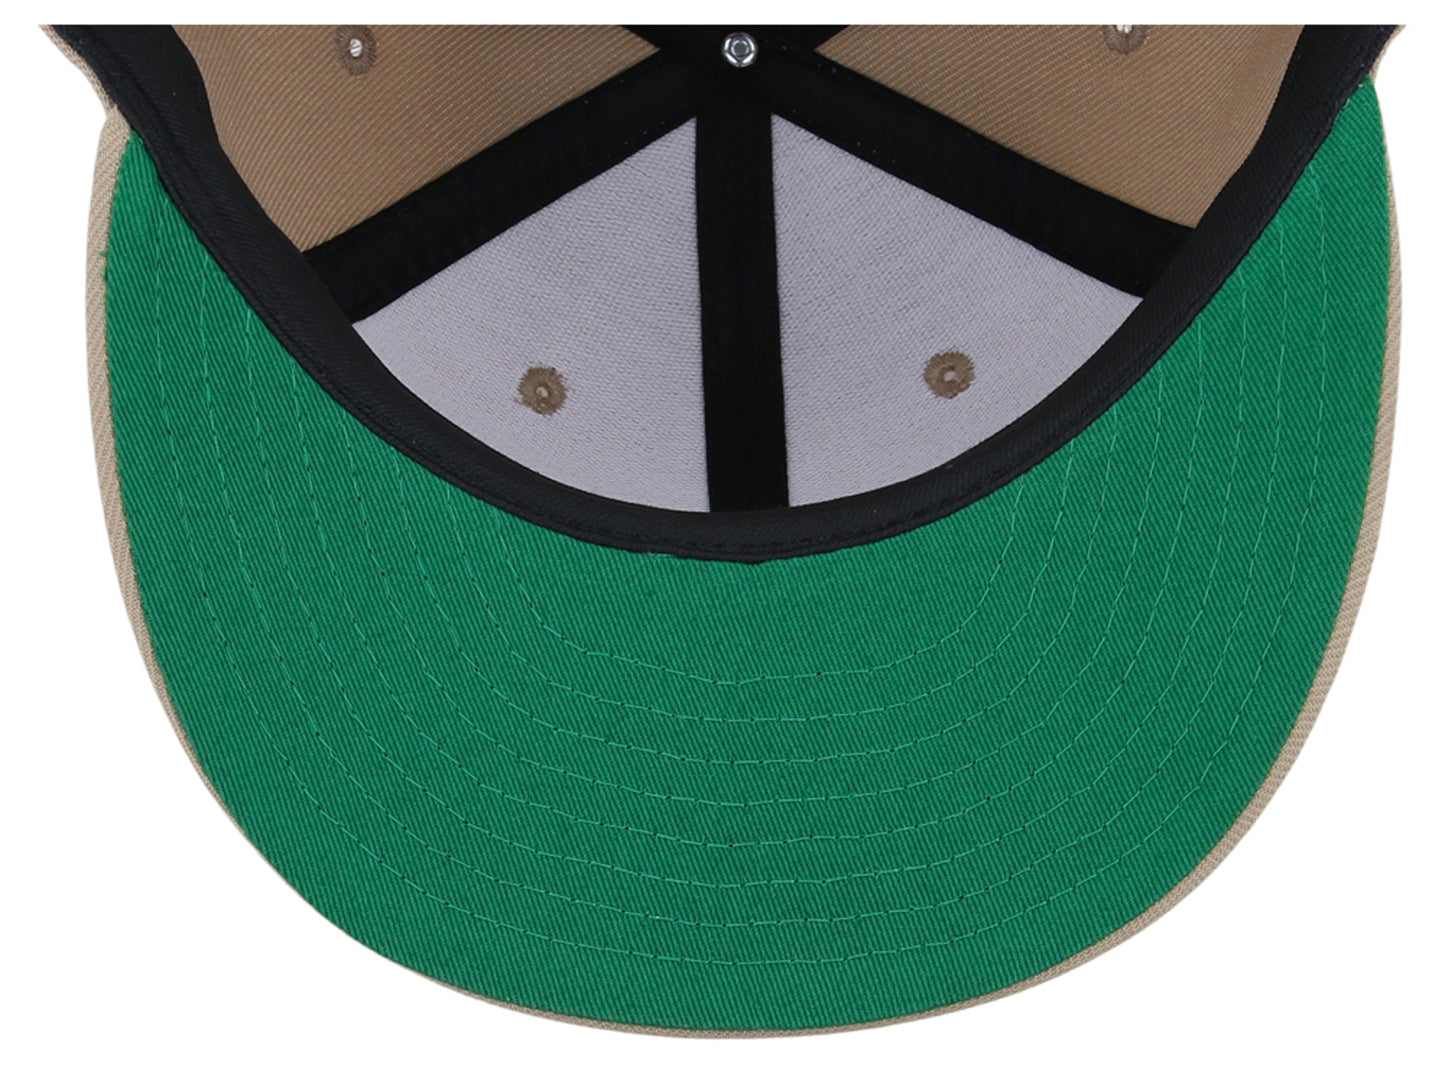 Crowns By Lids Full Court Fitted UV Cap - Khaki/Green